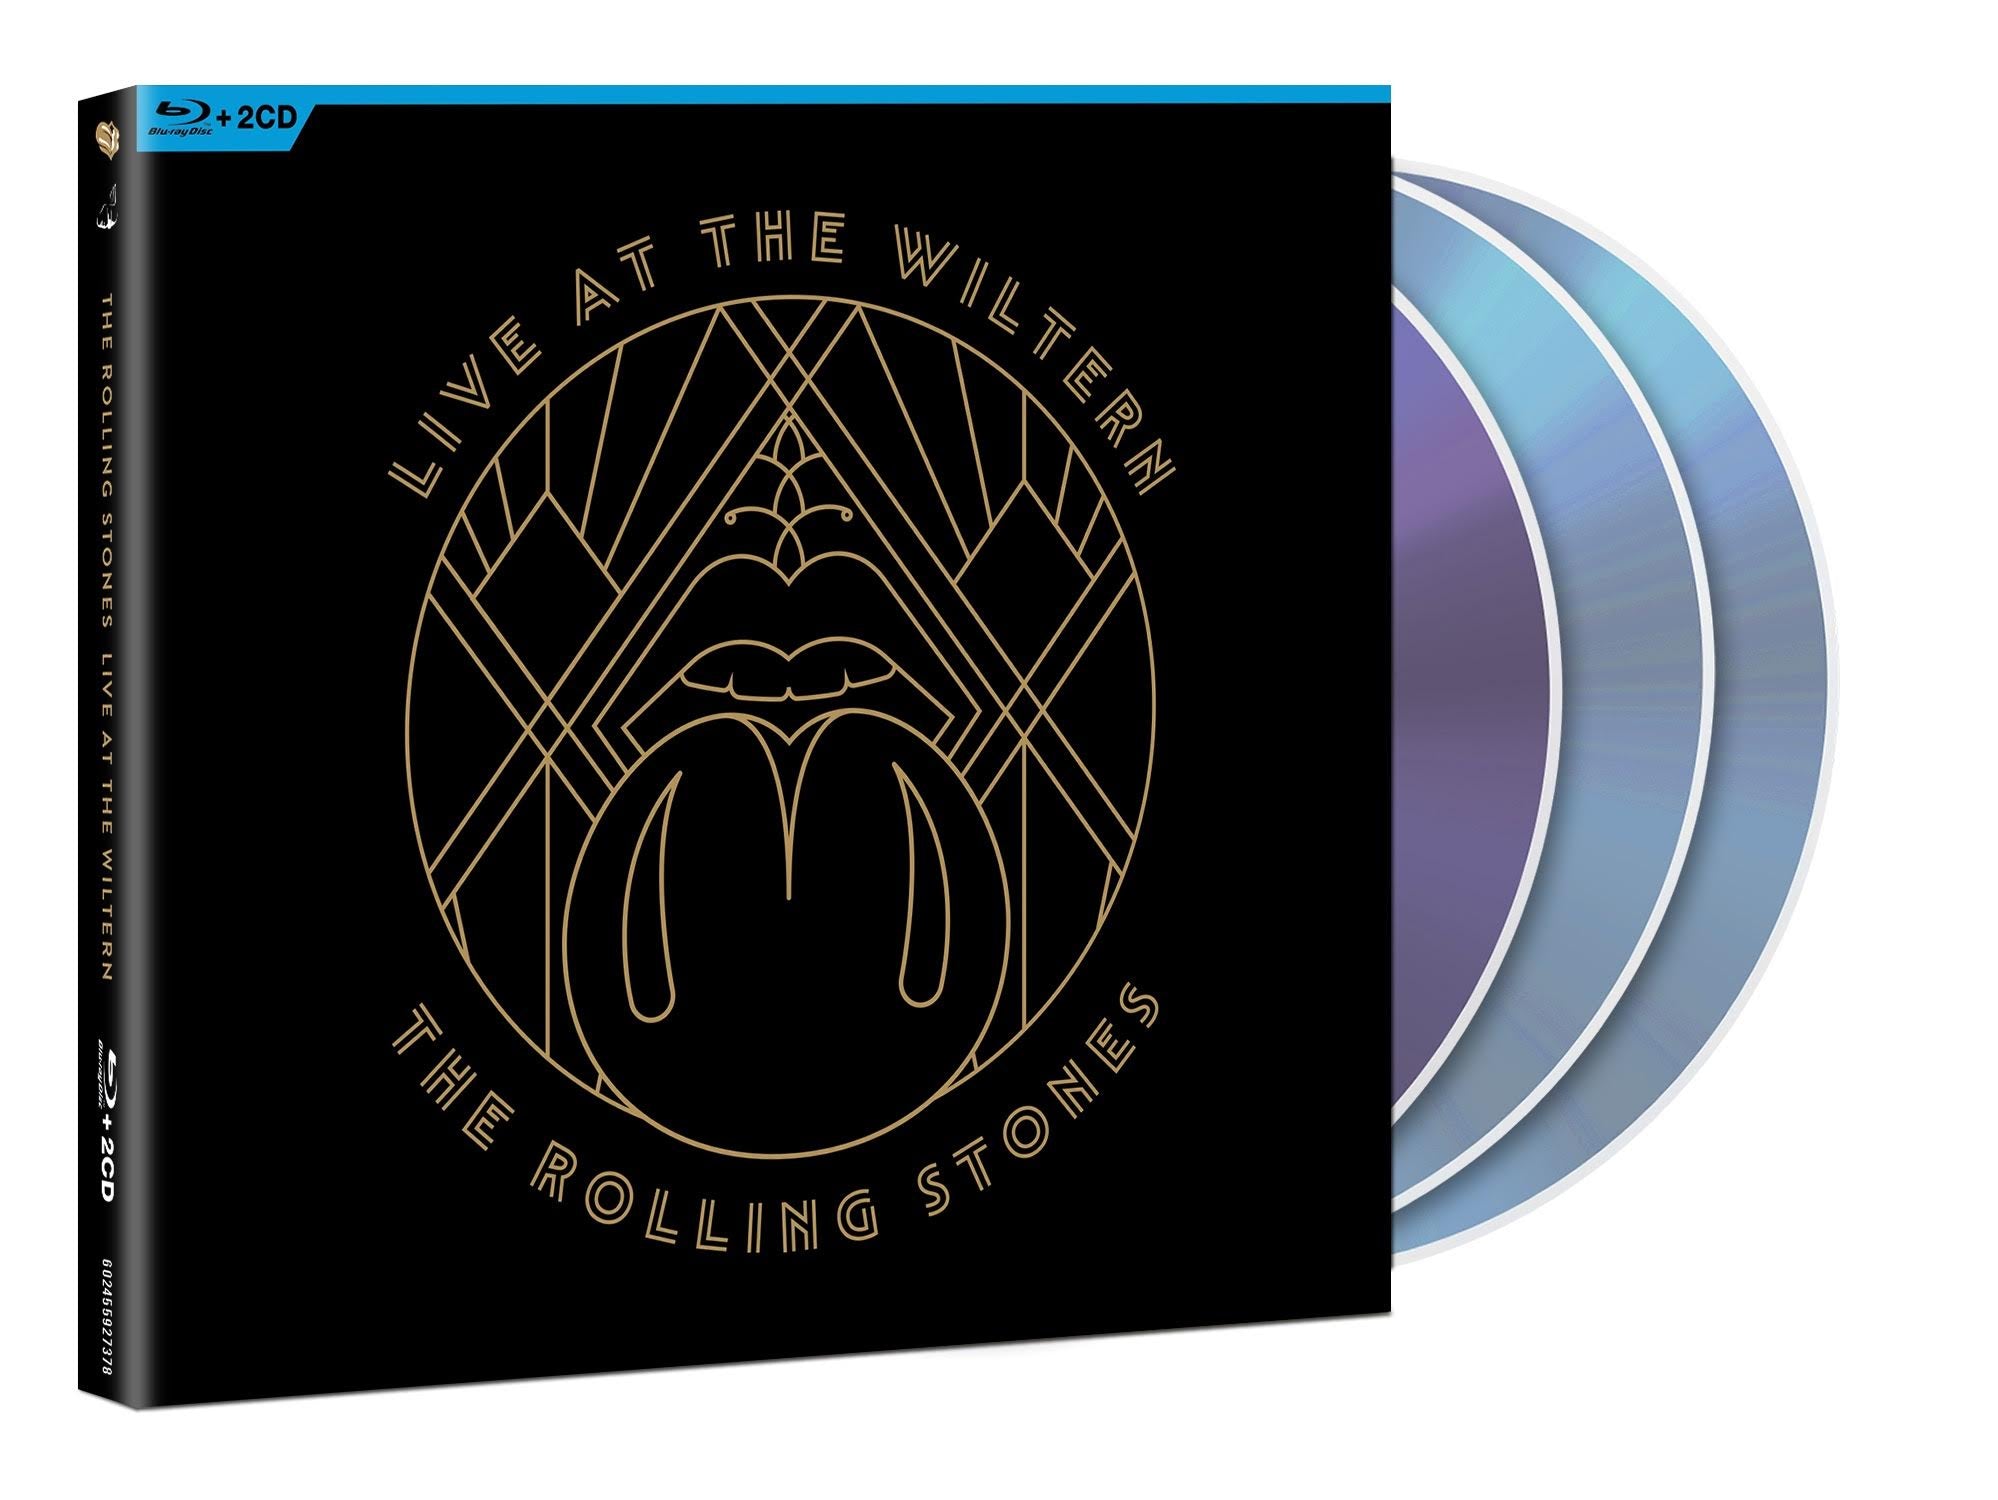 Rolling Stones- Live At The Wiltern (2CD+BR)